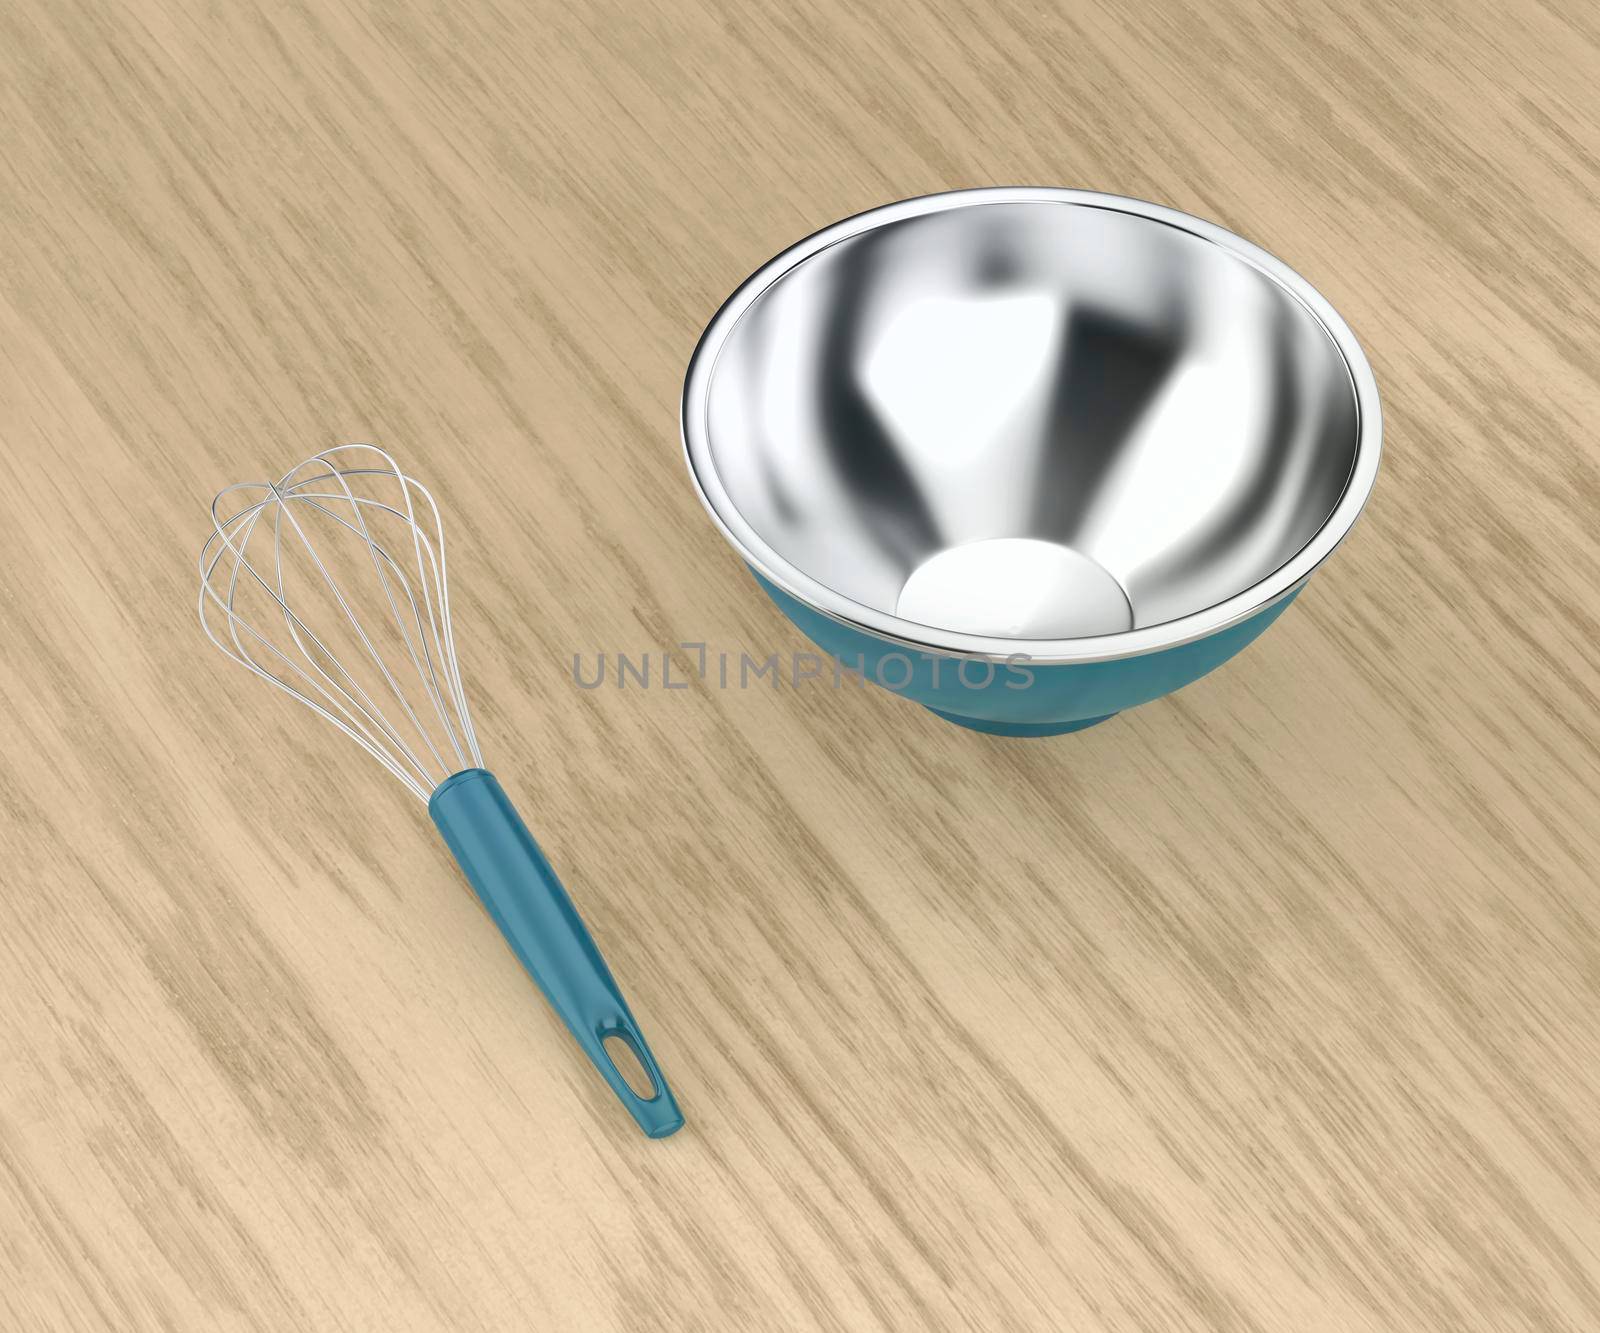 Balloon whisk and empty metal bowl
 by magraphics